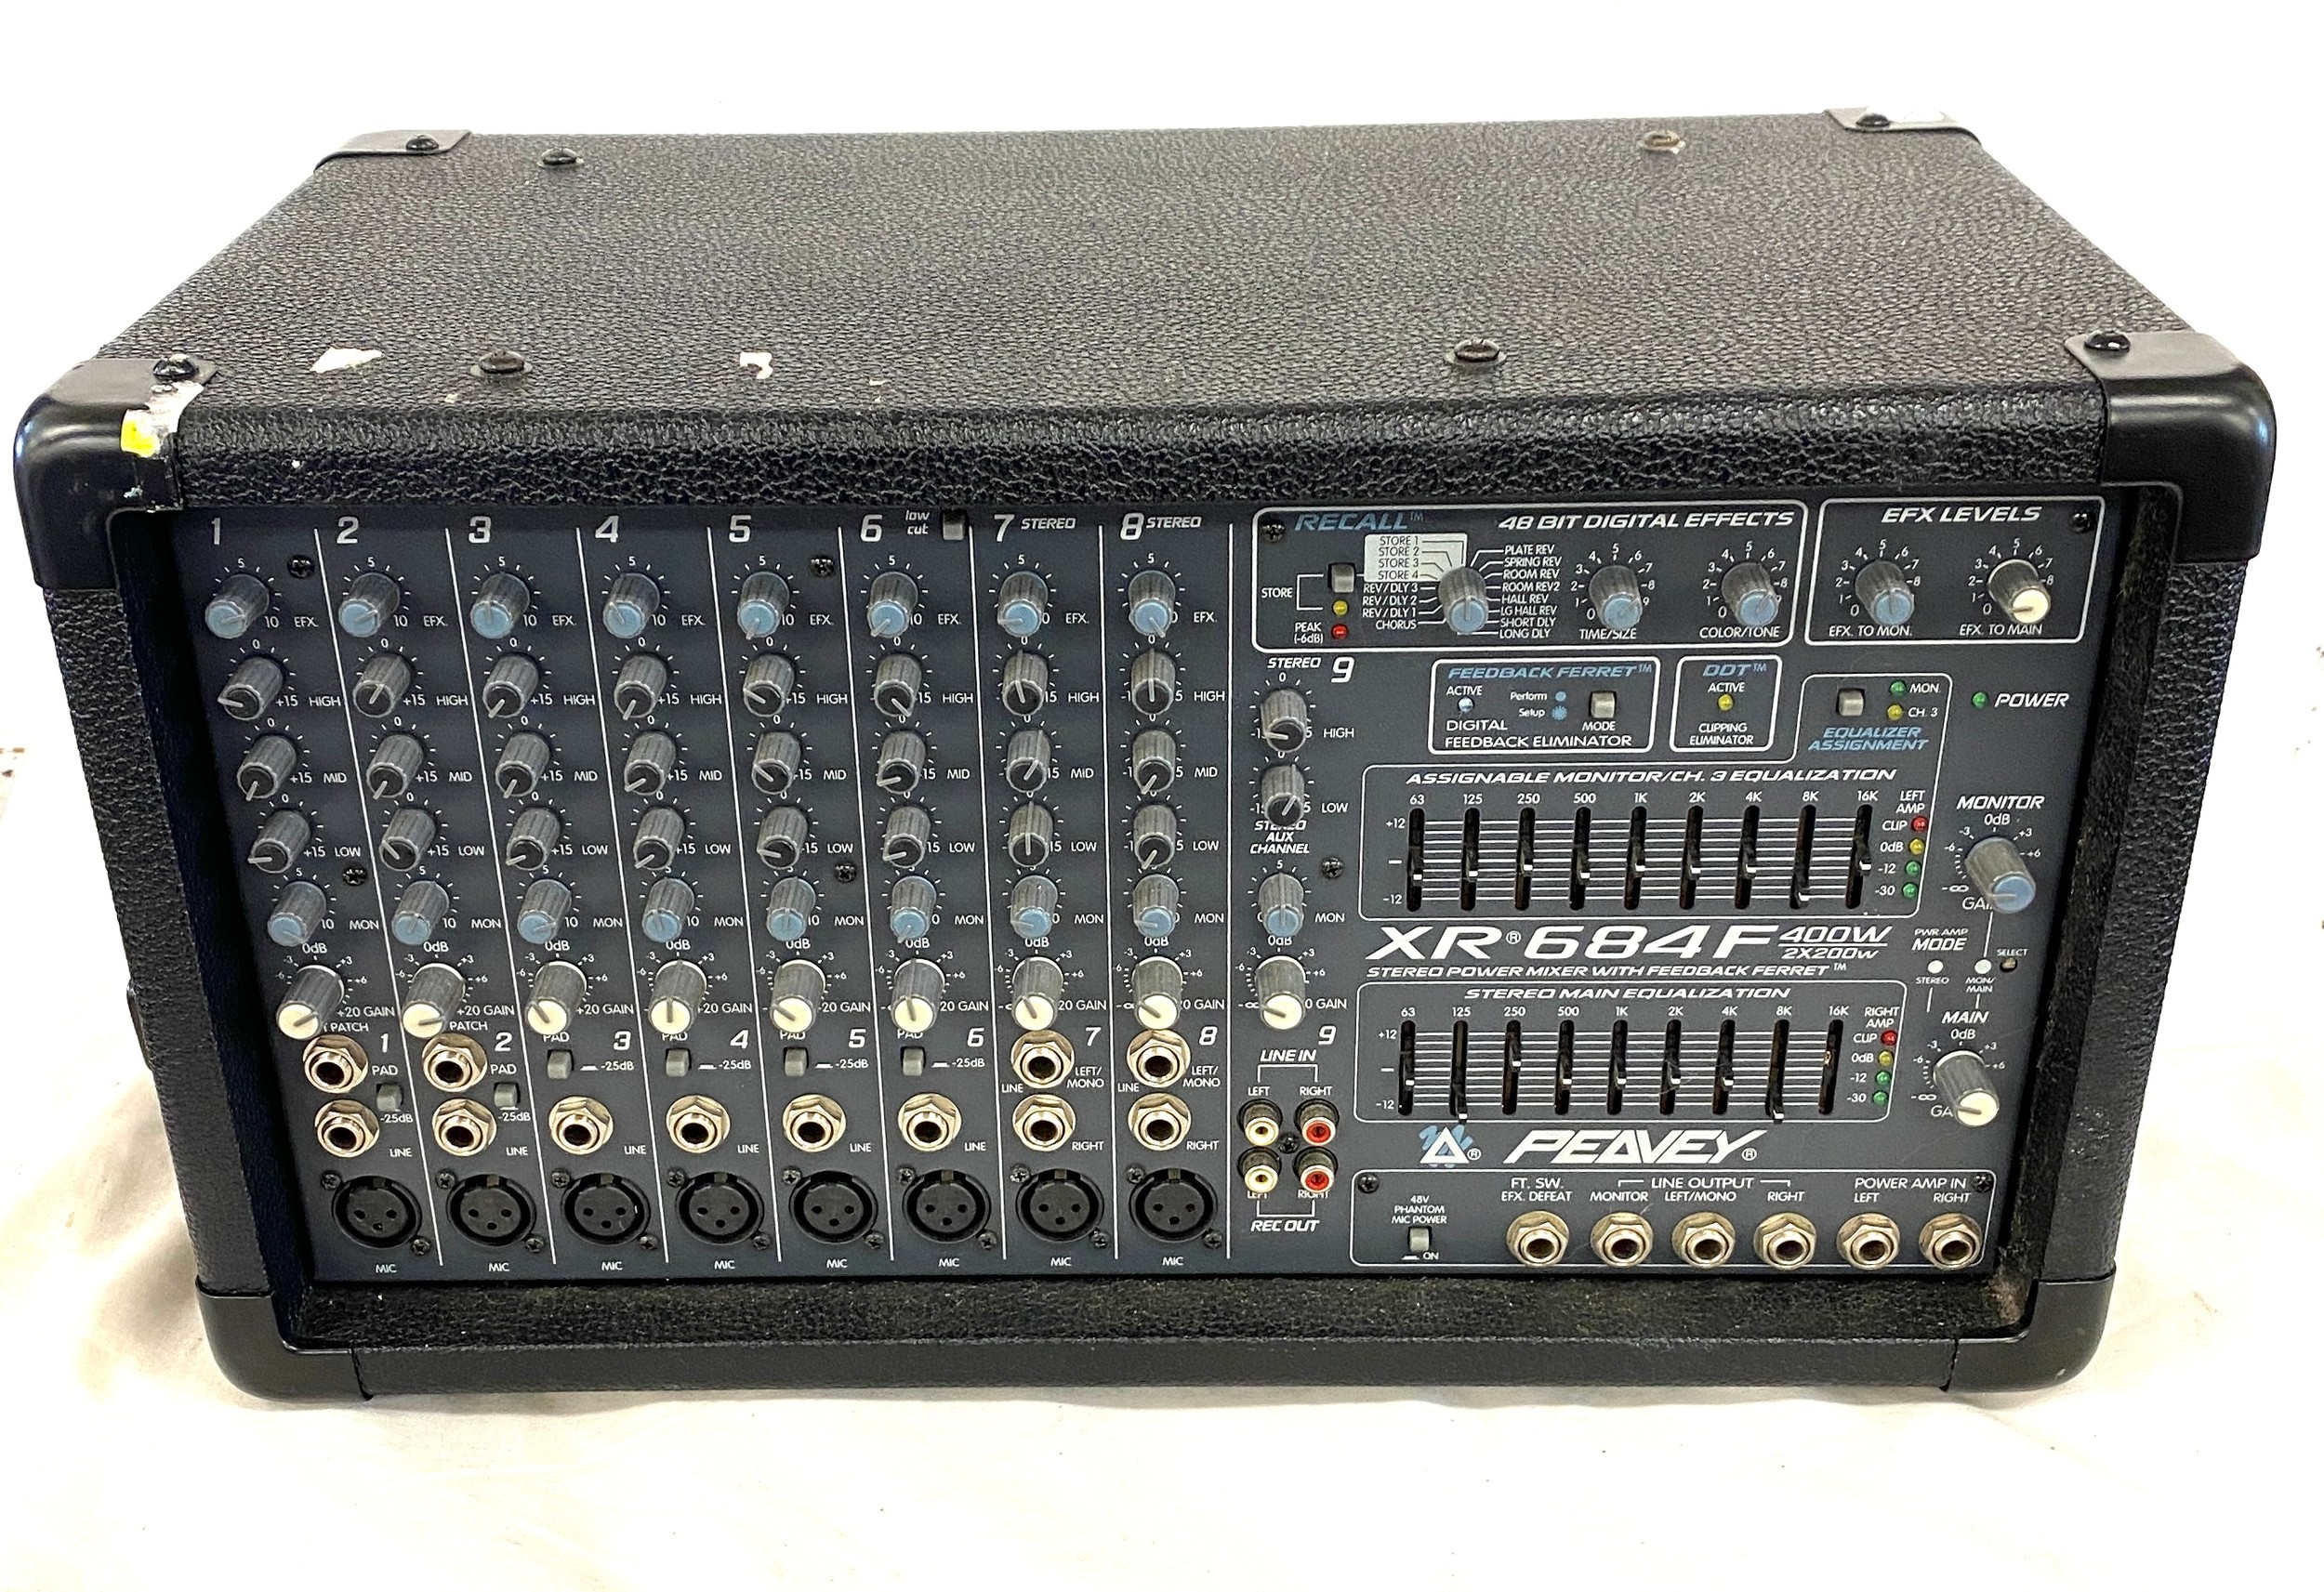 Stereo power mixer with feedback ferret model no XR 684F- untested and no leads